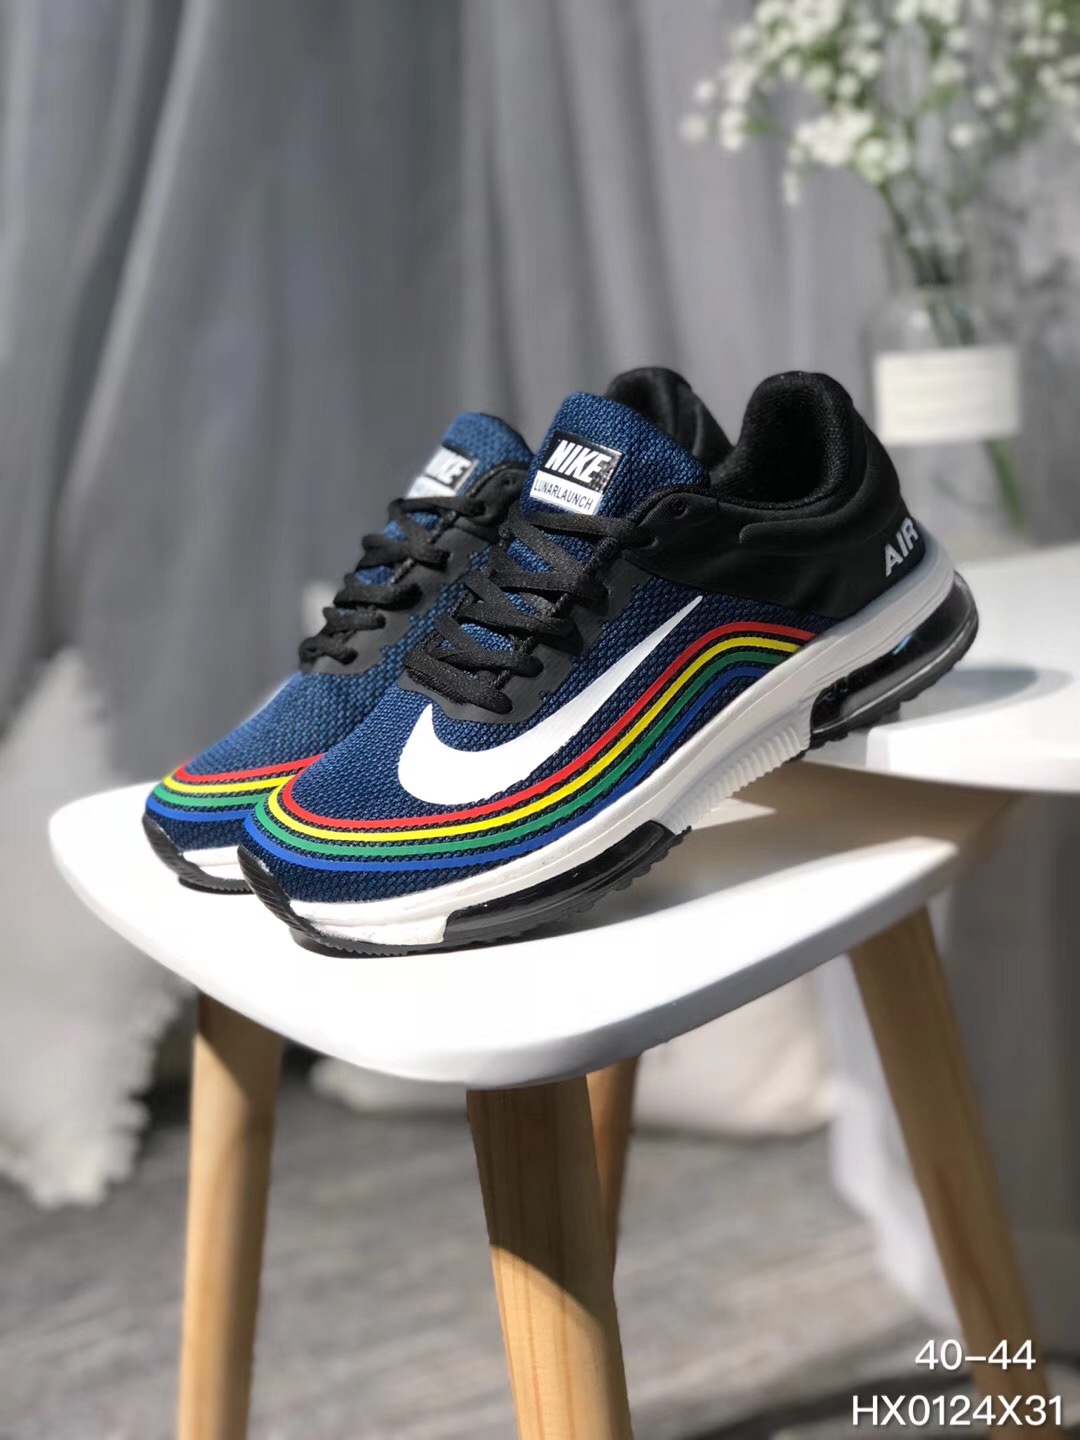 Nike Air Max 2018 Flyknit Blue Black Yellow Red Running Shoes